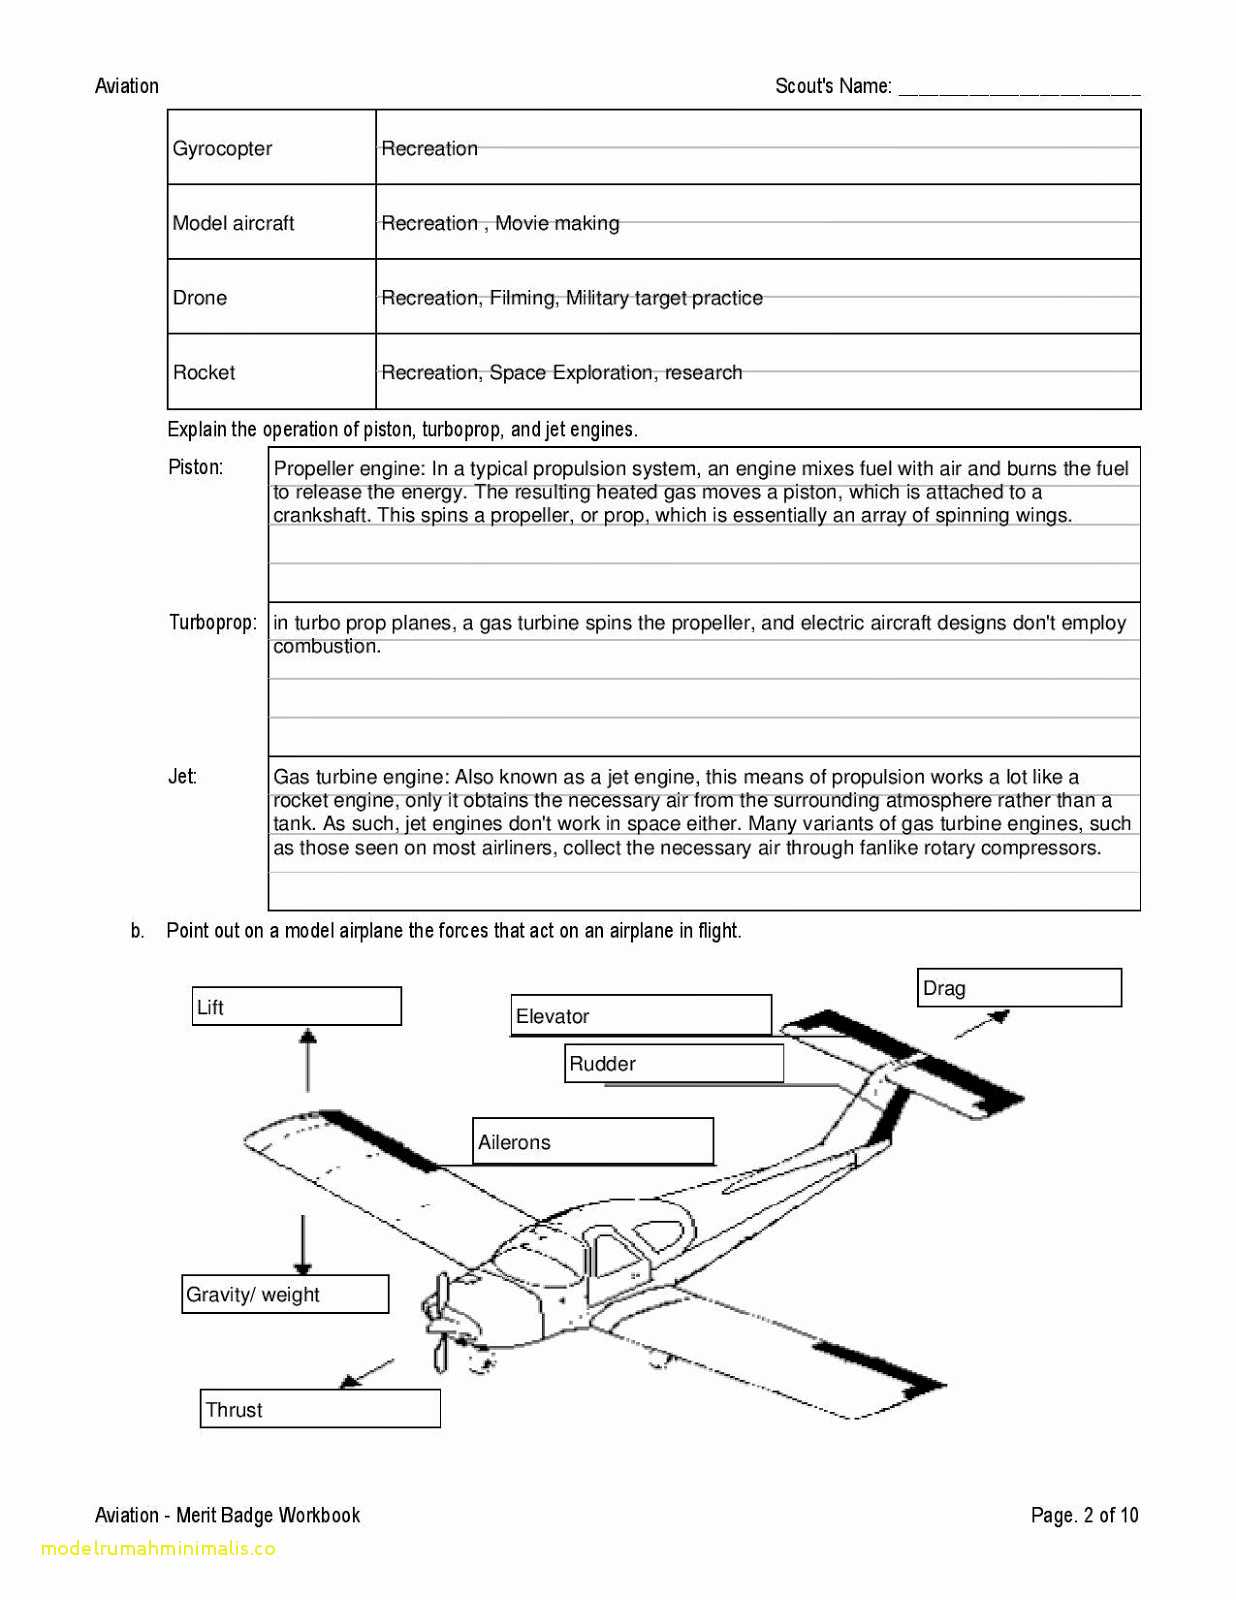 Space Exploration Merit Badge Worksheet with Graphy Merit Badge Worksheet Choice Image Worksheet Math for Kids